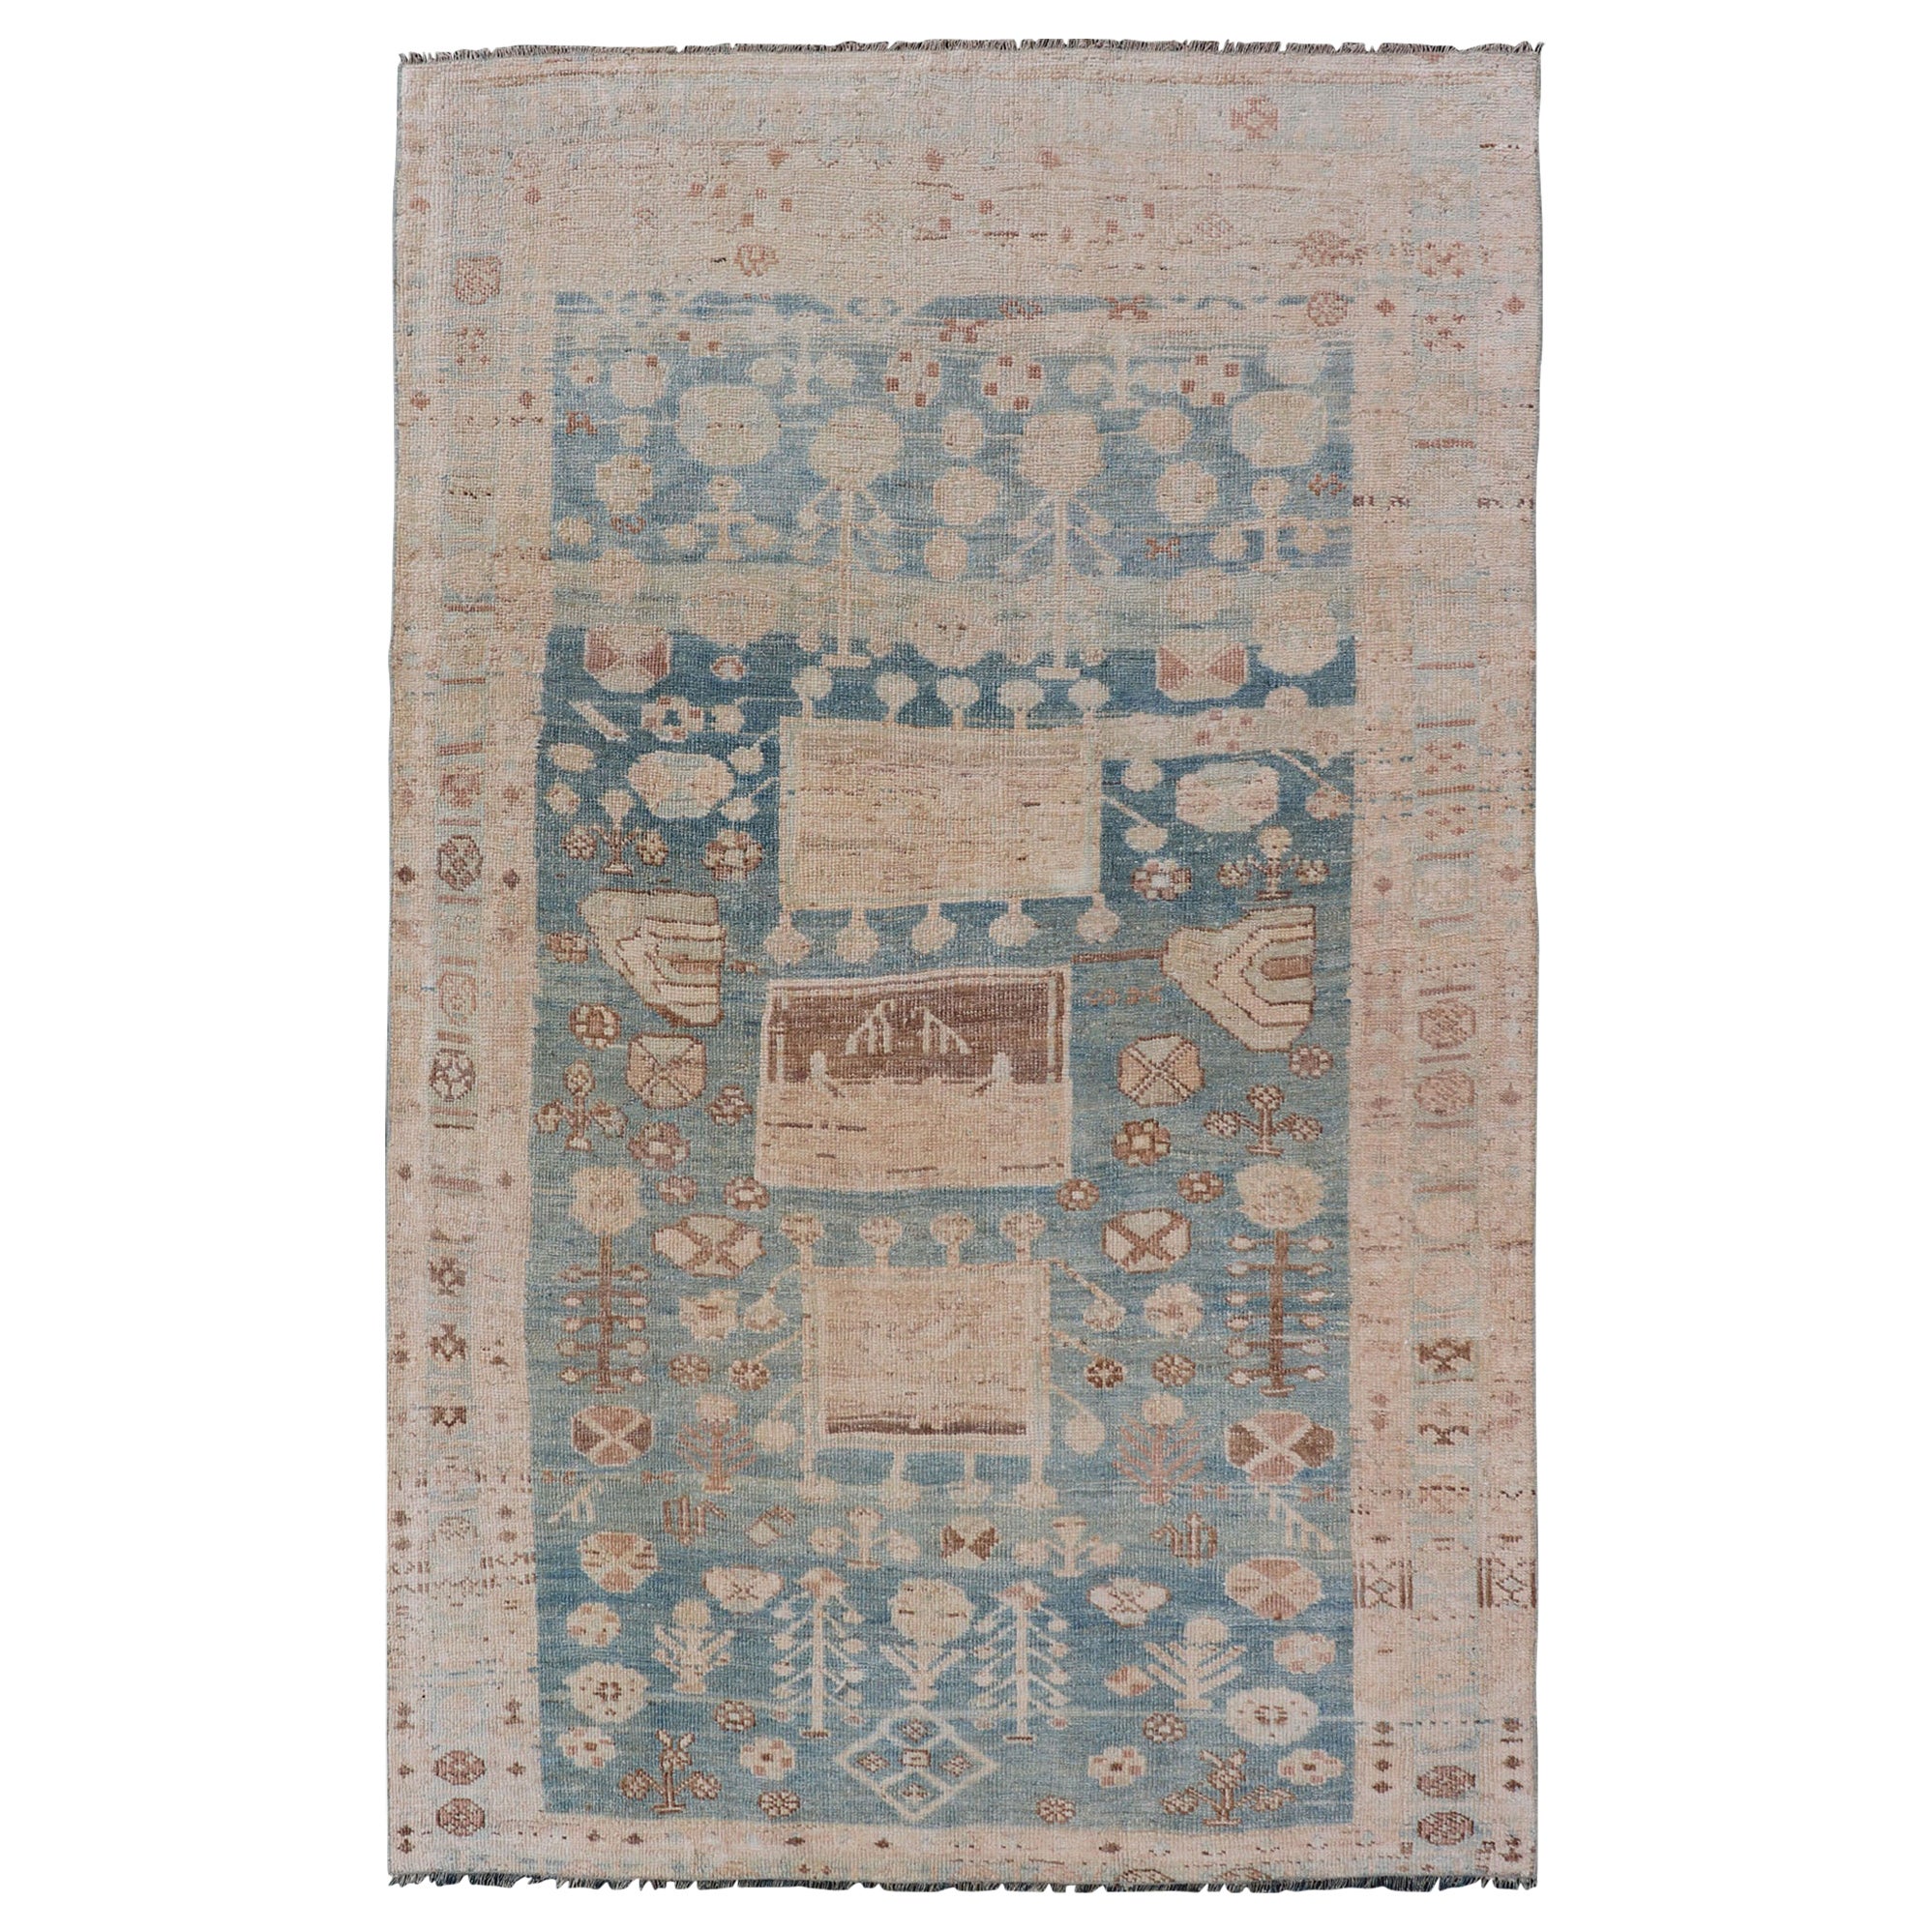 Persian Kurdish Antique Rug with Tribal Design in Light Blue, Teal, and Cream